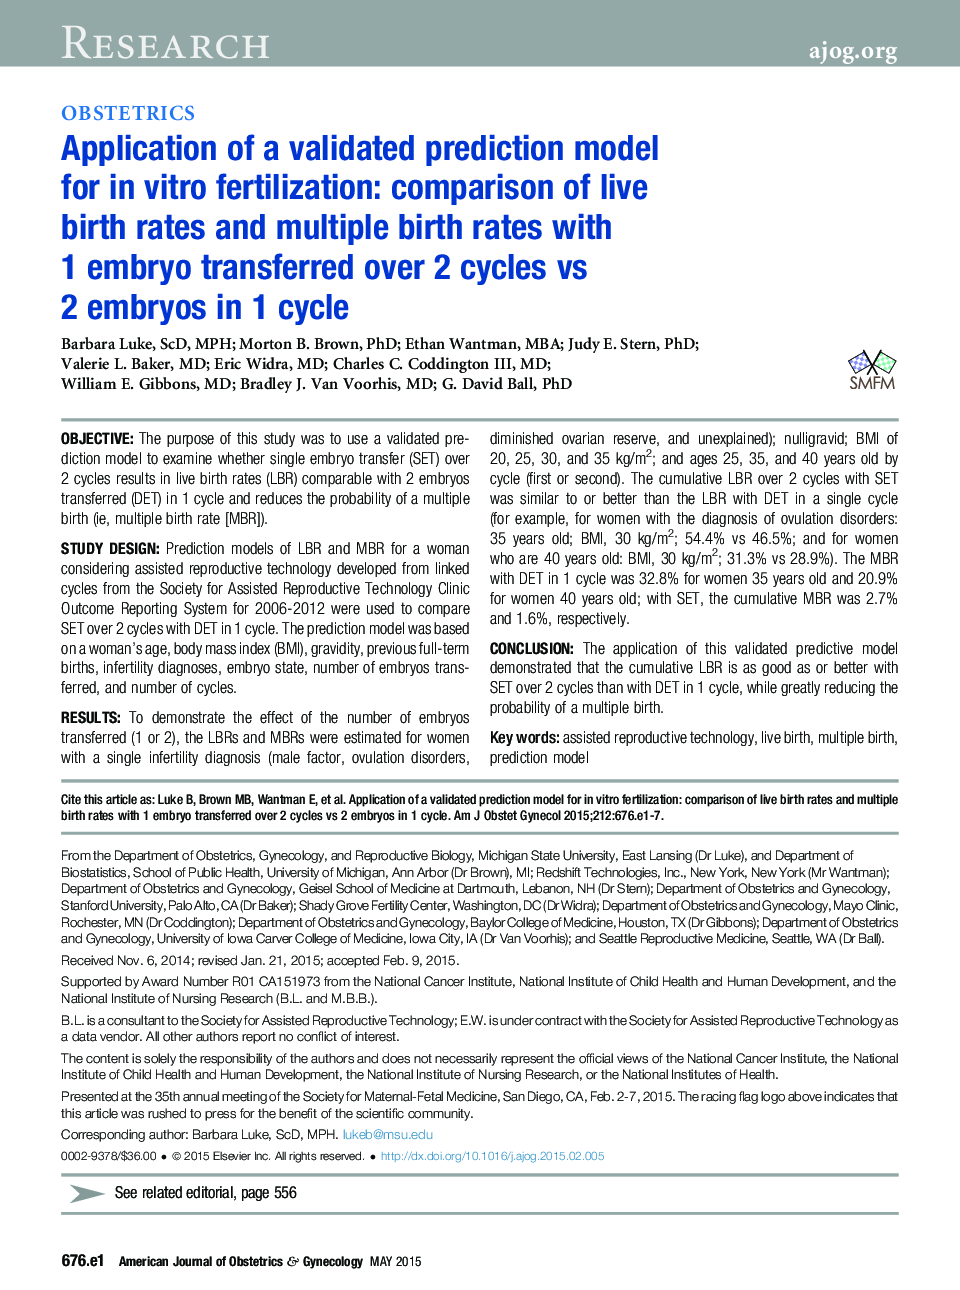 Application of a validated prediction model for inÂ vitro fertilization: comparison of live birth rates and multiple birth rates with 1 embryo transferred over 2 cycles vs 2 embryos in 1 cycle